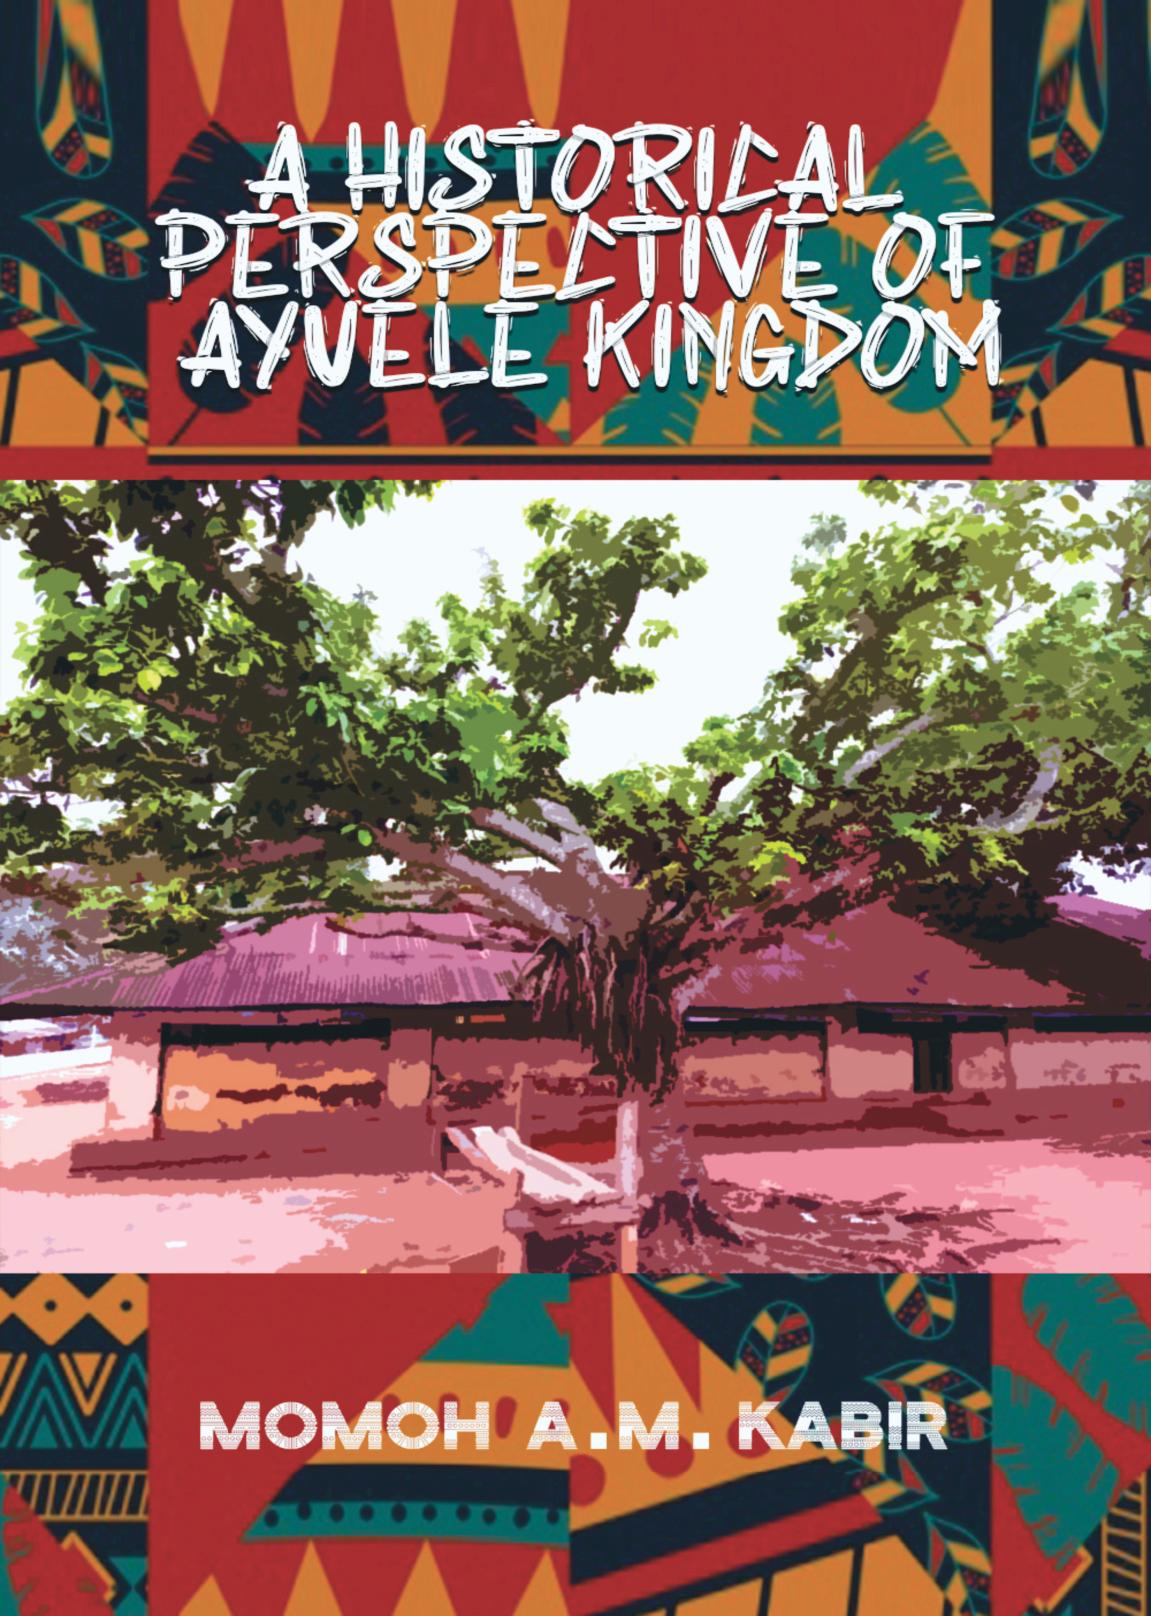 A-Historical-Perspective-of-Ayuele-Kingdom